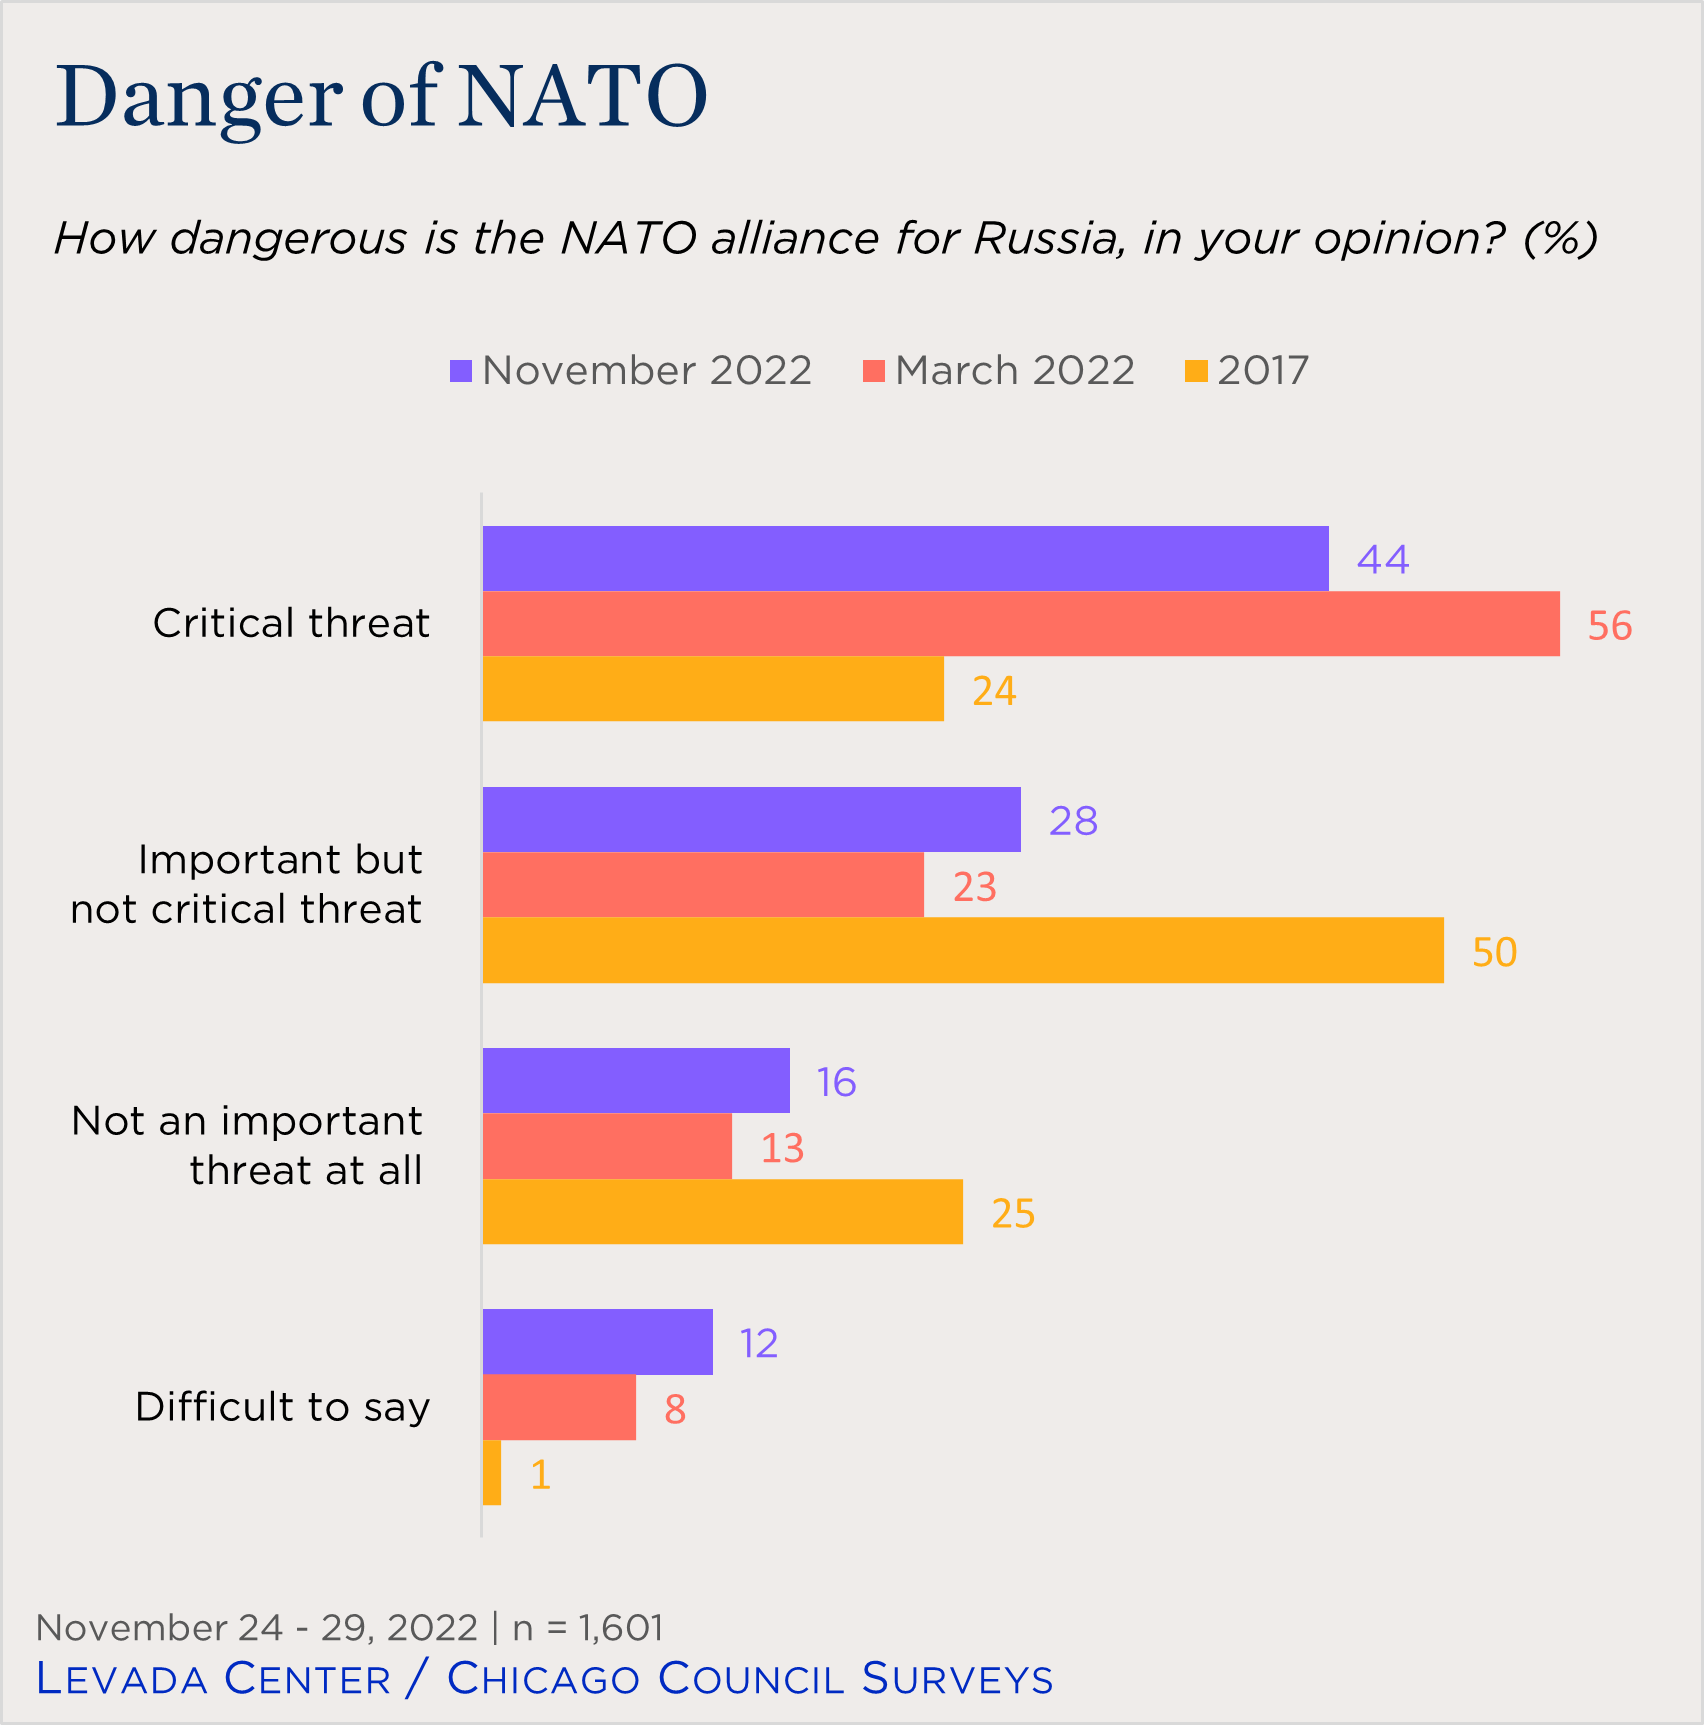 "bar chart showing Russian views of the danger of the NATO alliance over time"